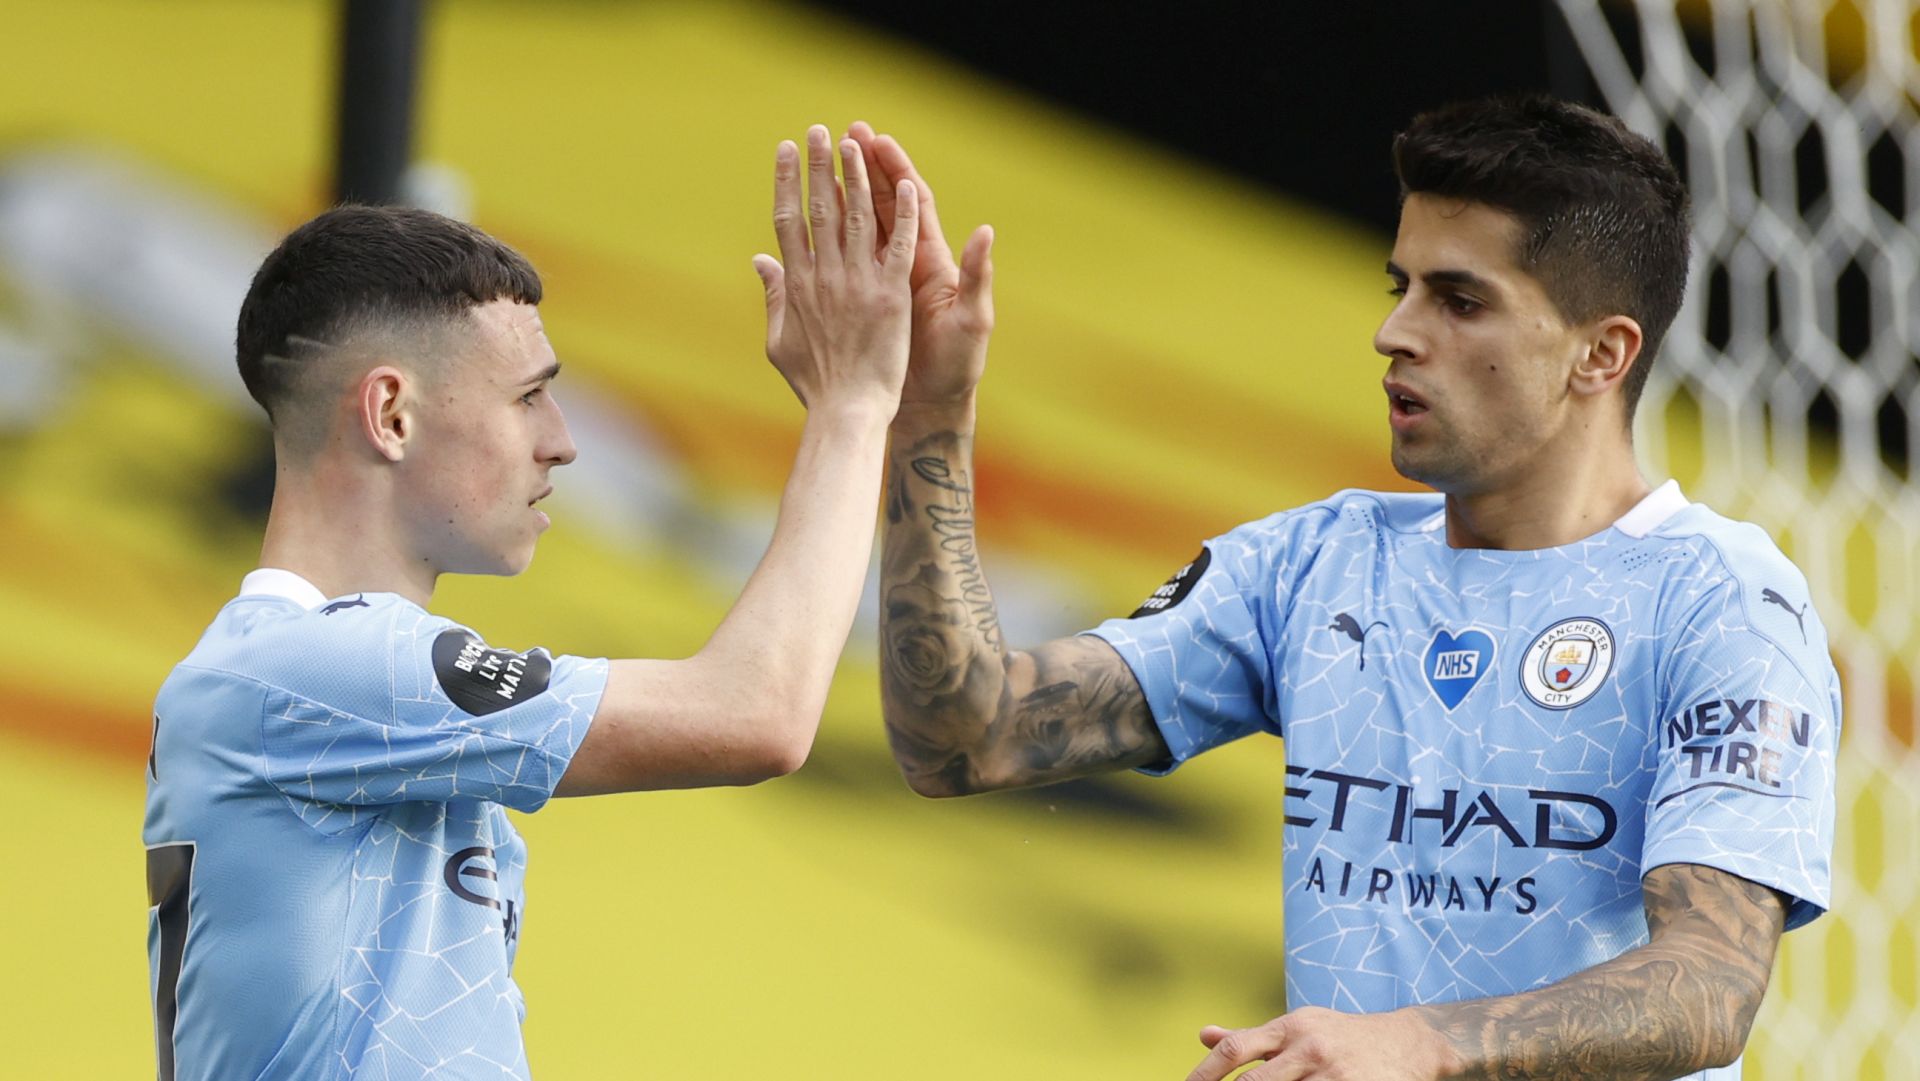 epa08559101 Phil Foden (L) of Manchester City celebrates with Joao Cancelo (R) of Manchester City  after scoring a goal during the English Premier League match between Watford and Manchester City in Watford, Britain, 21 July 2020.  EPA/John Sibley/NMC/Pool EDITORIAL USE ONLY. No use with unauthorized audio, video, data, fixture lists, club/league logos or 'live' services. Online in-match use limited to 120 images, no video emulation. No use in betting, games or single club/league/player publications.